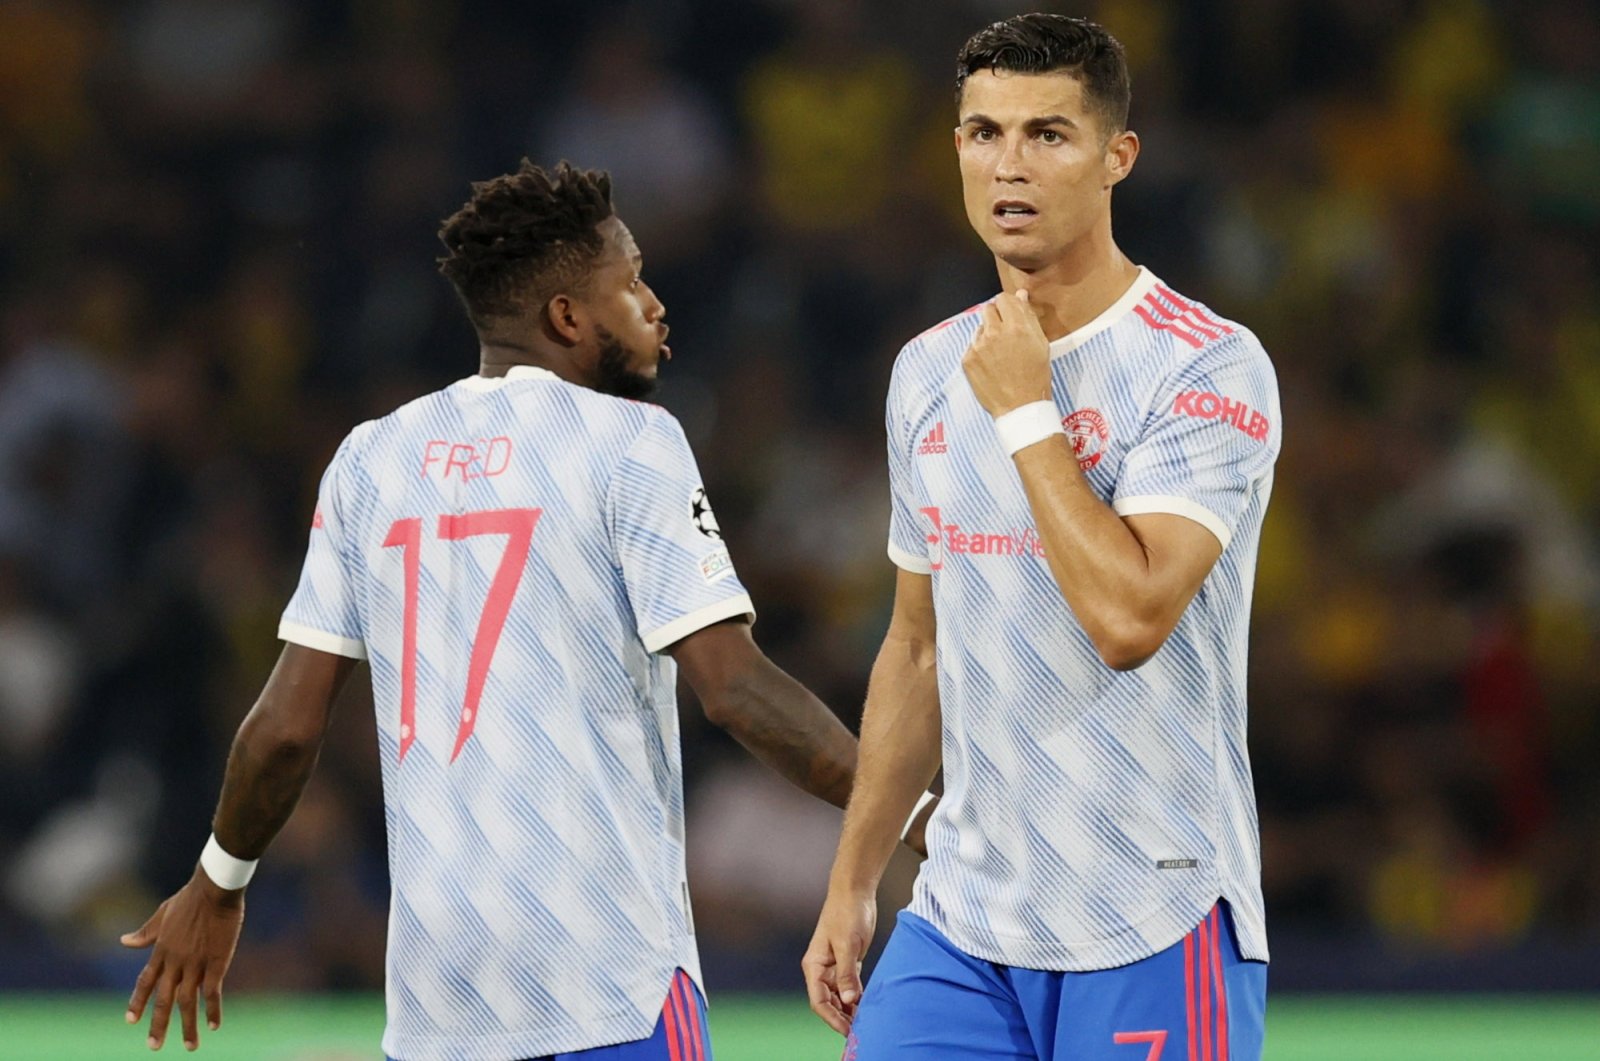 Manchester United's Cristiano Ronaldo (R) and Fred during a Champions League match against Young Boys at Stadion Wankdorf, Bern, Switzerland, Sept. 14, 2021.